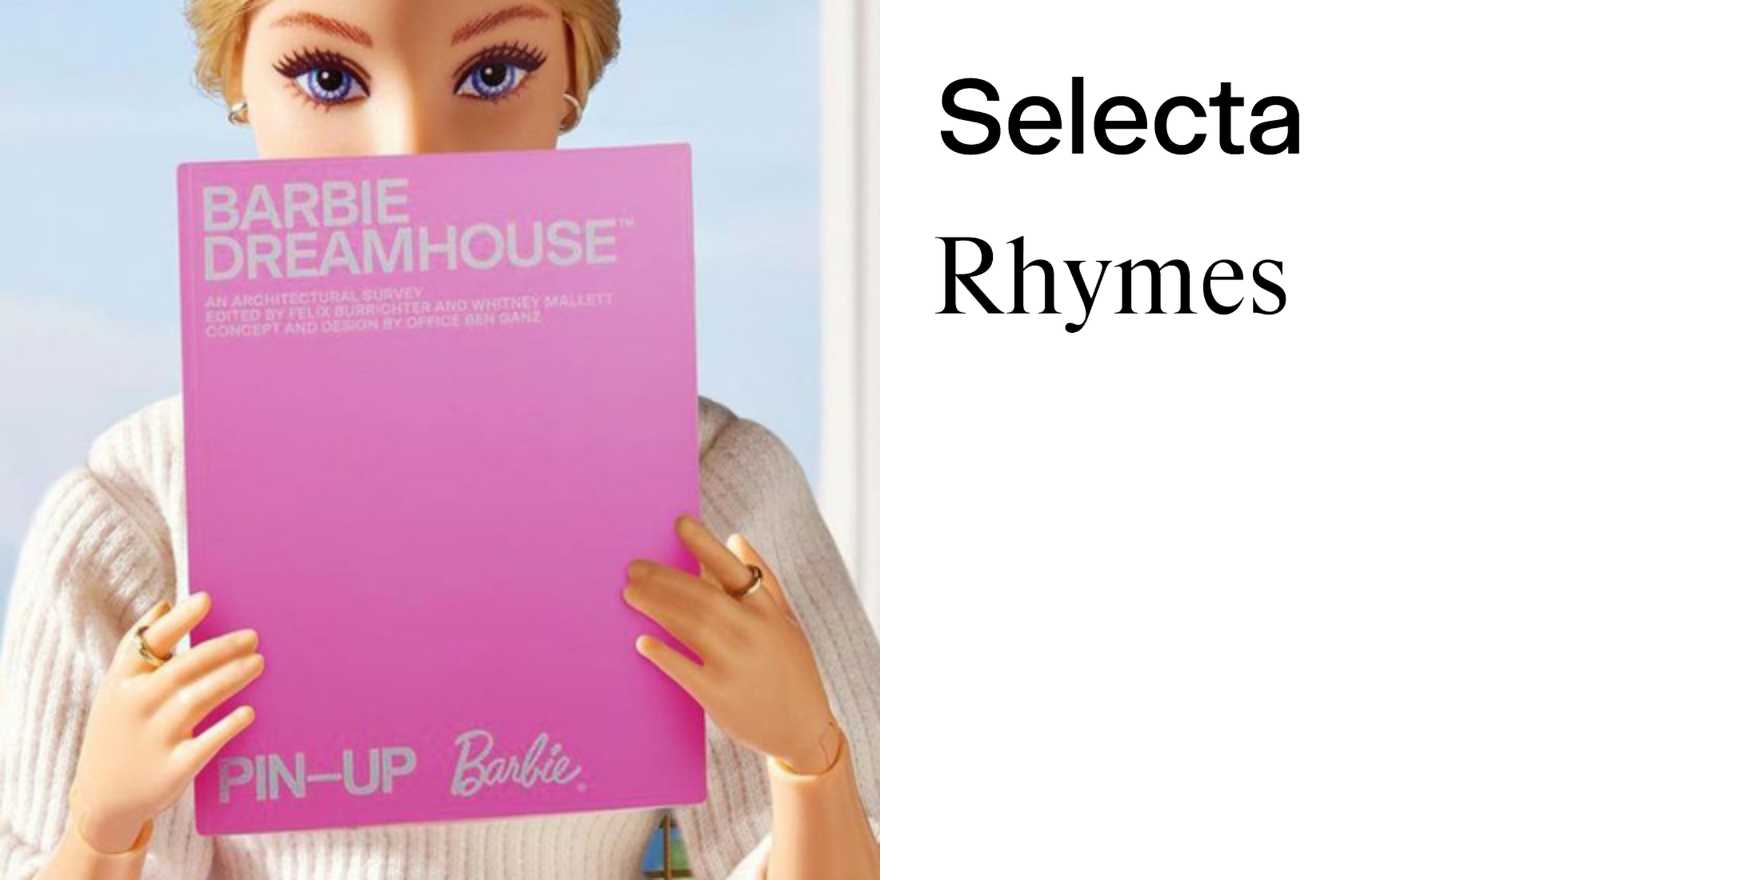 Barbie Dreamhouse: An Architectural Survey - Fonts In Use